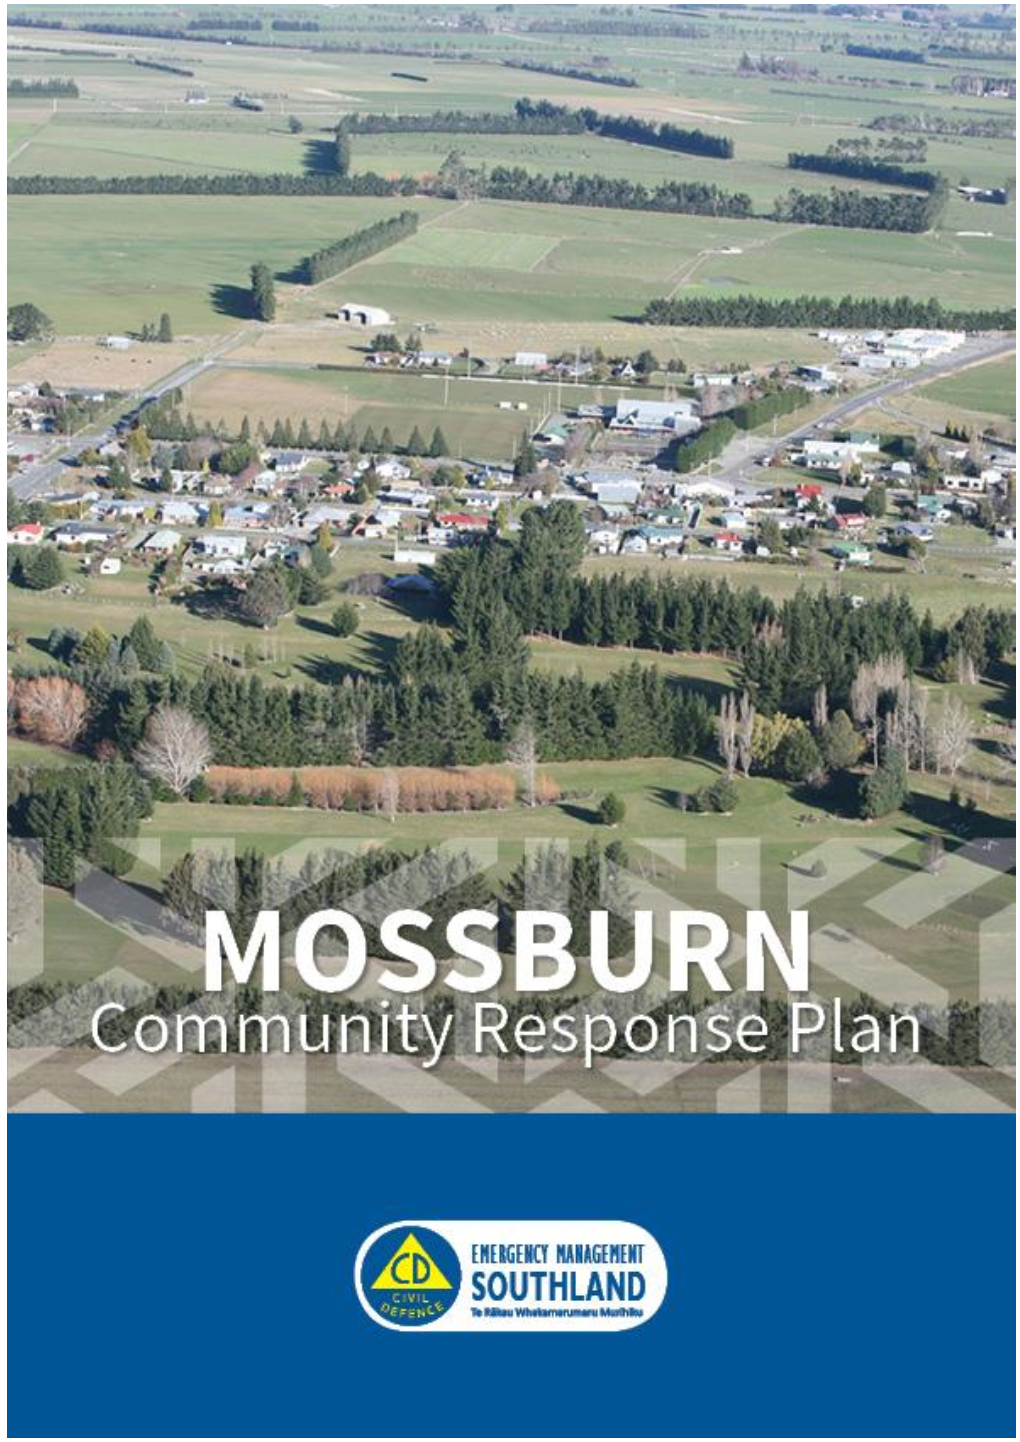 Mossburn Community Response Plan 2020 Find More Information on How You Can Be Prepared for an Emergency